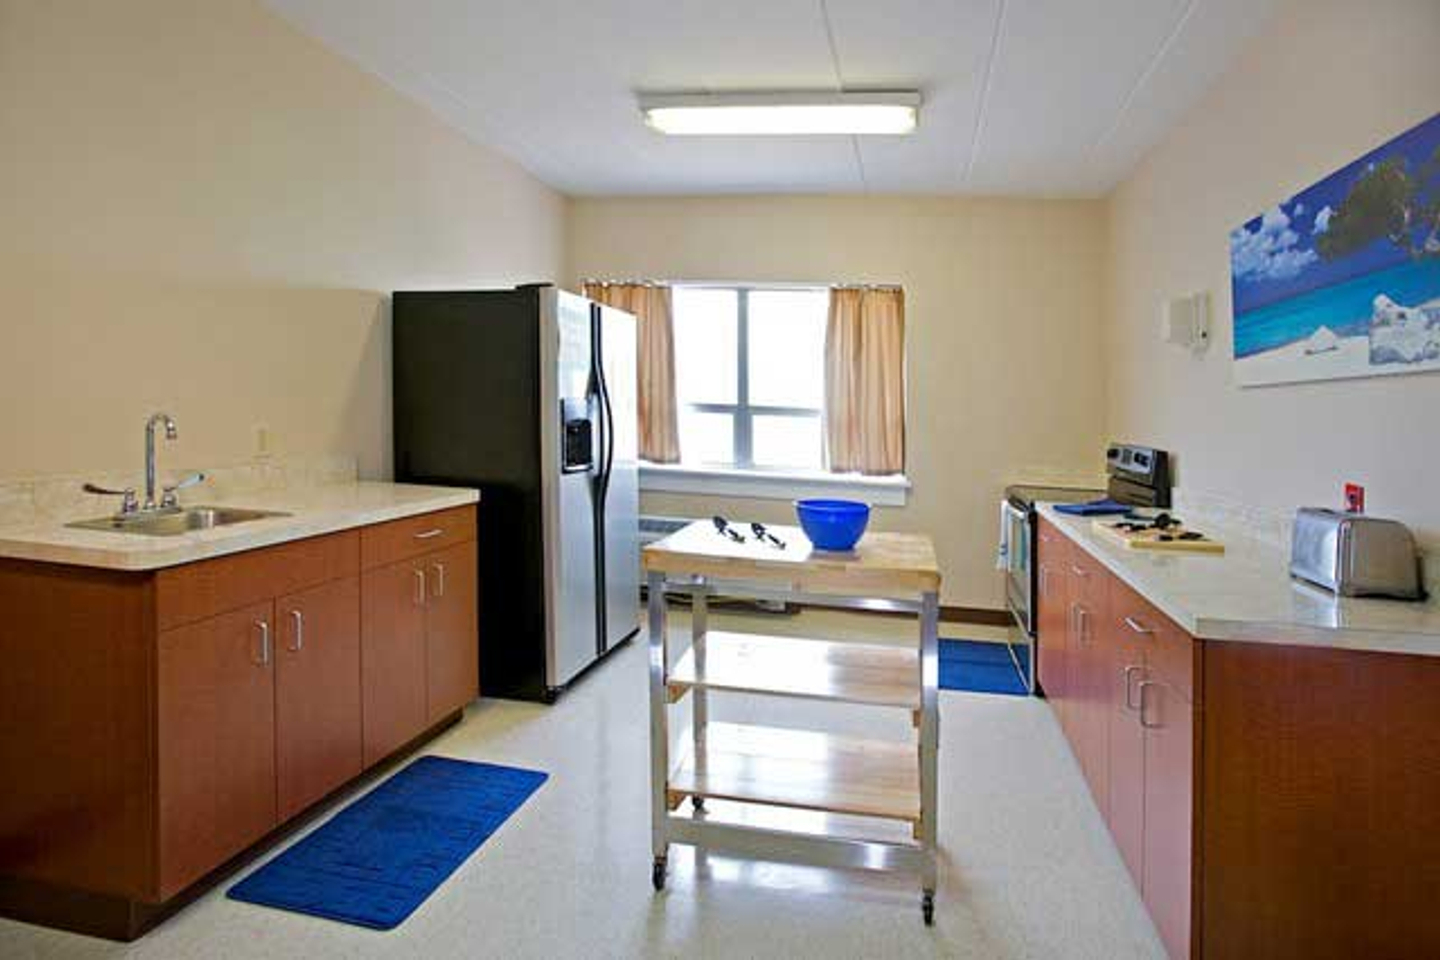 The kitchen at Reflections Eating Disorder Treatment Center